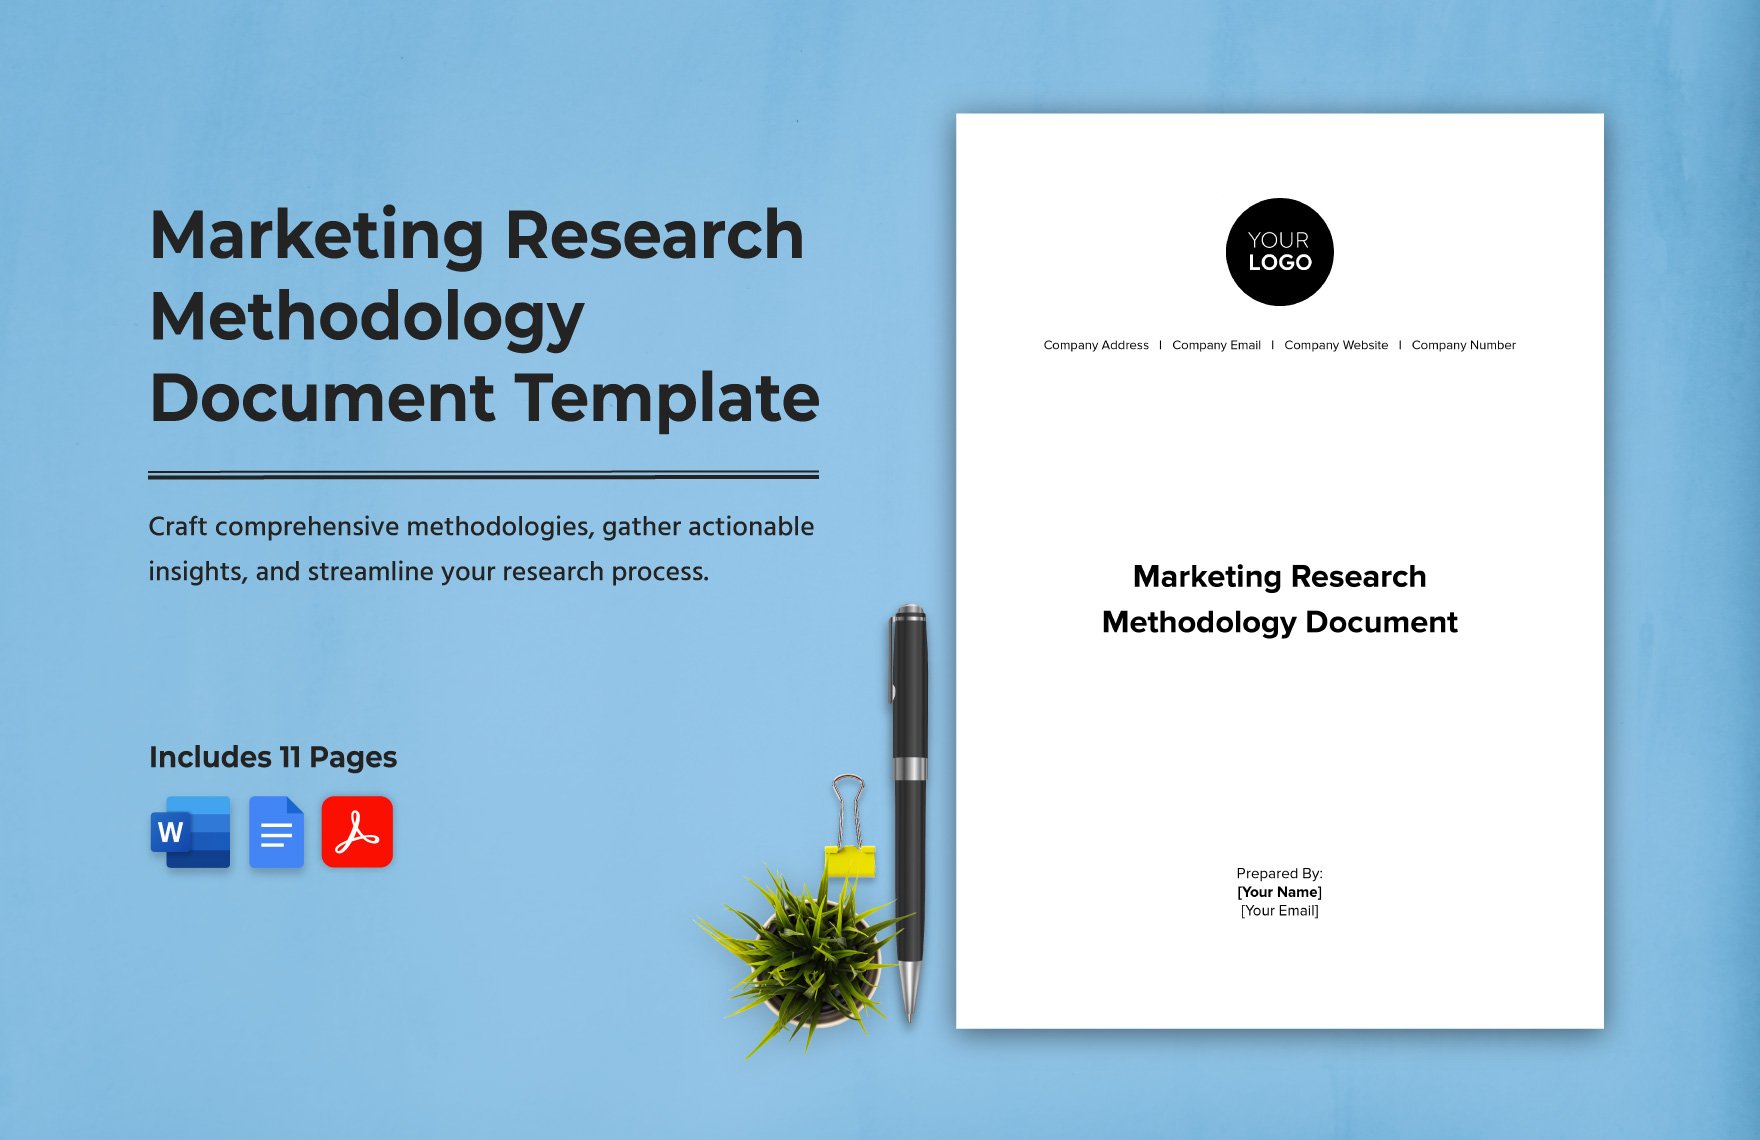 Marketing Research Methodology Document Template